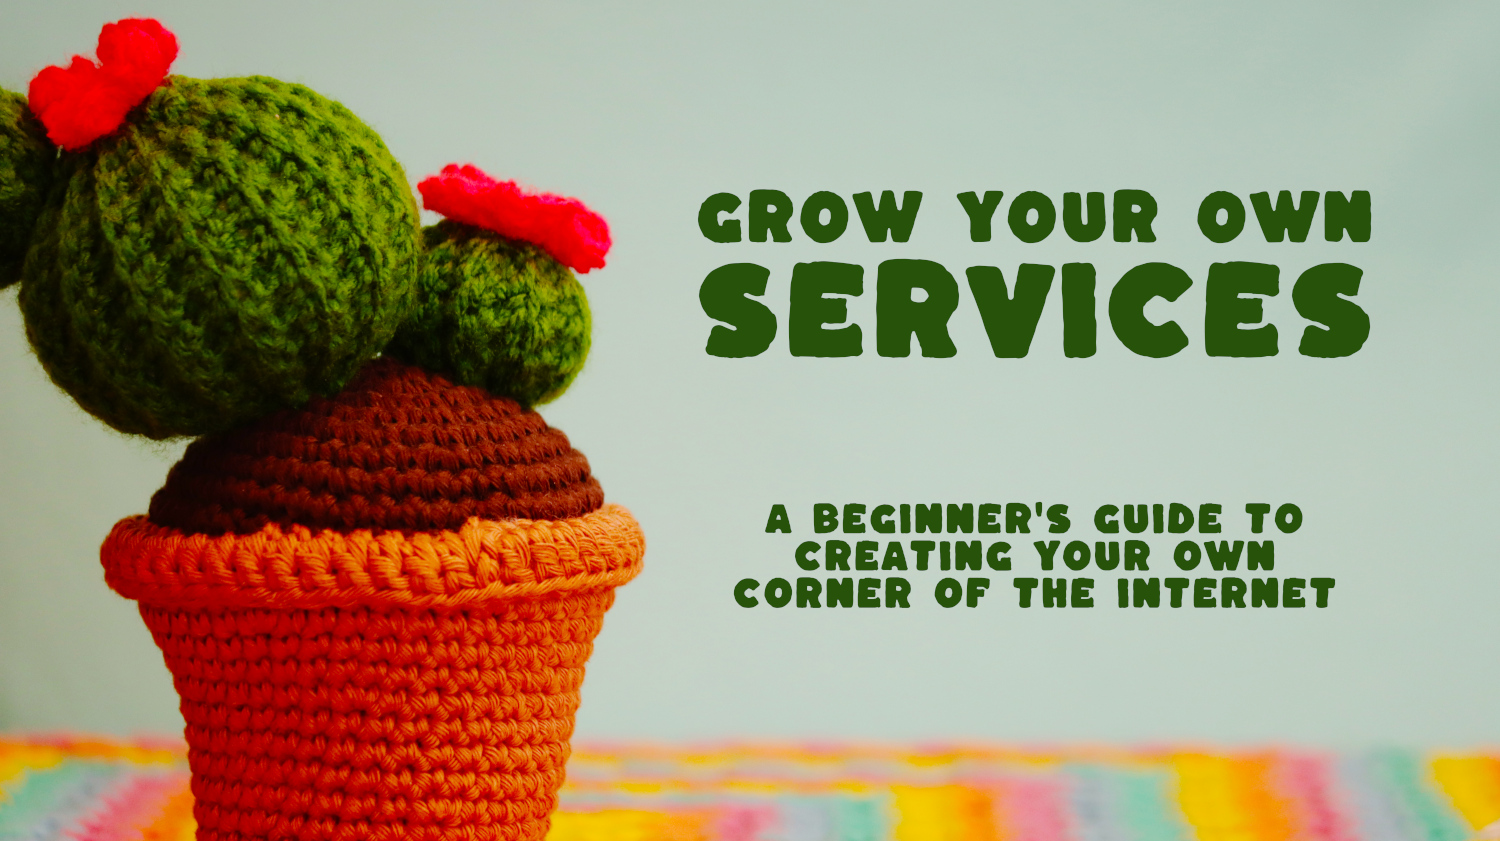 Caption "Grow your own services, a beginner's guide to creating your own corner of the internet" accompanied by a photo of a crocheted plant that is flowering.